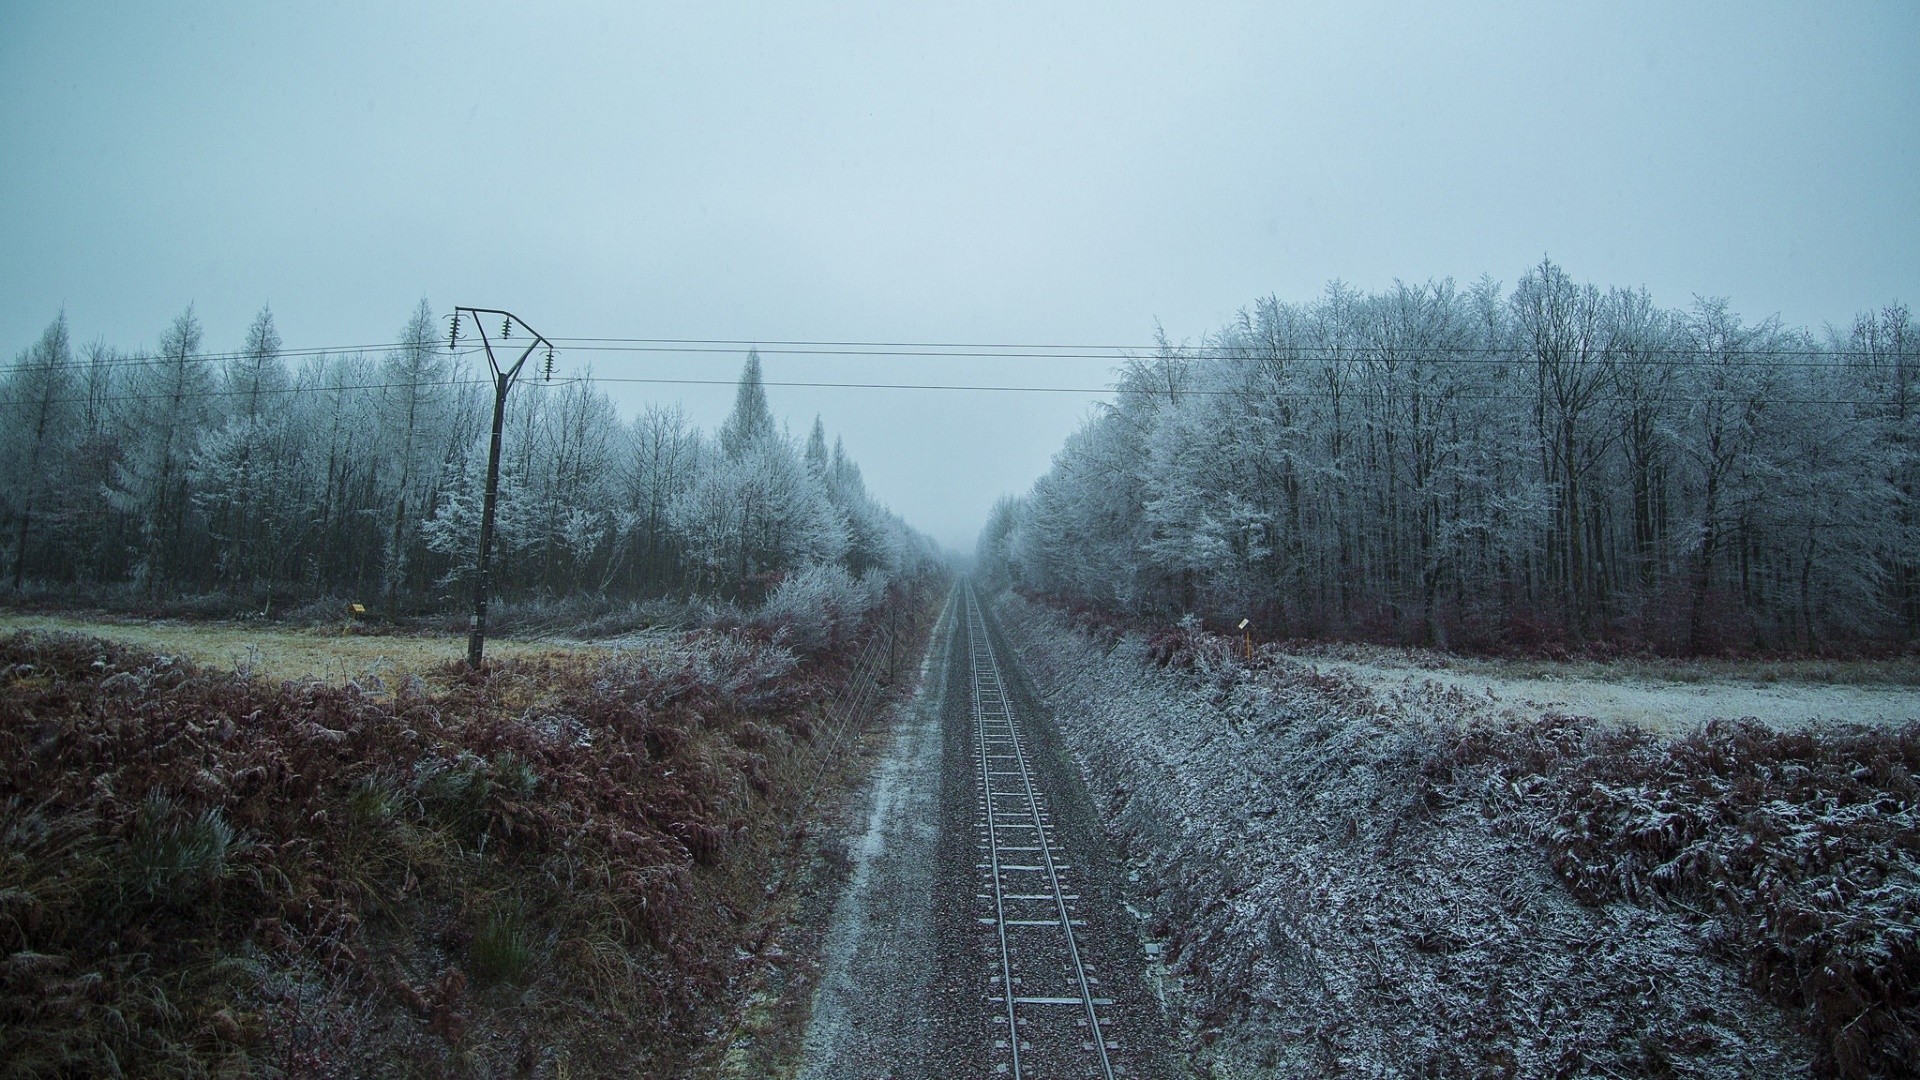 General 1920x1080 railway landscape trees cold winter